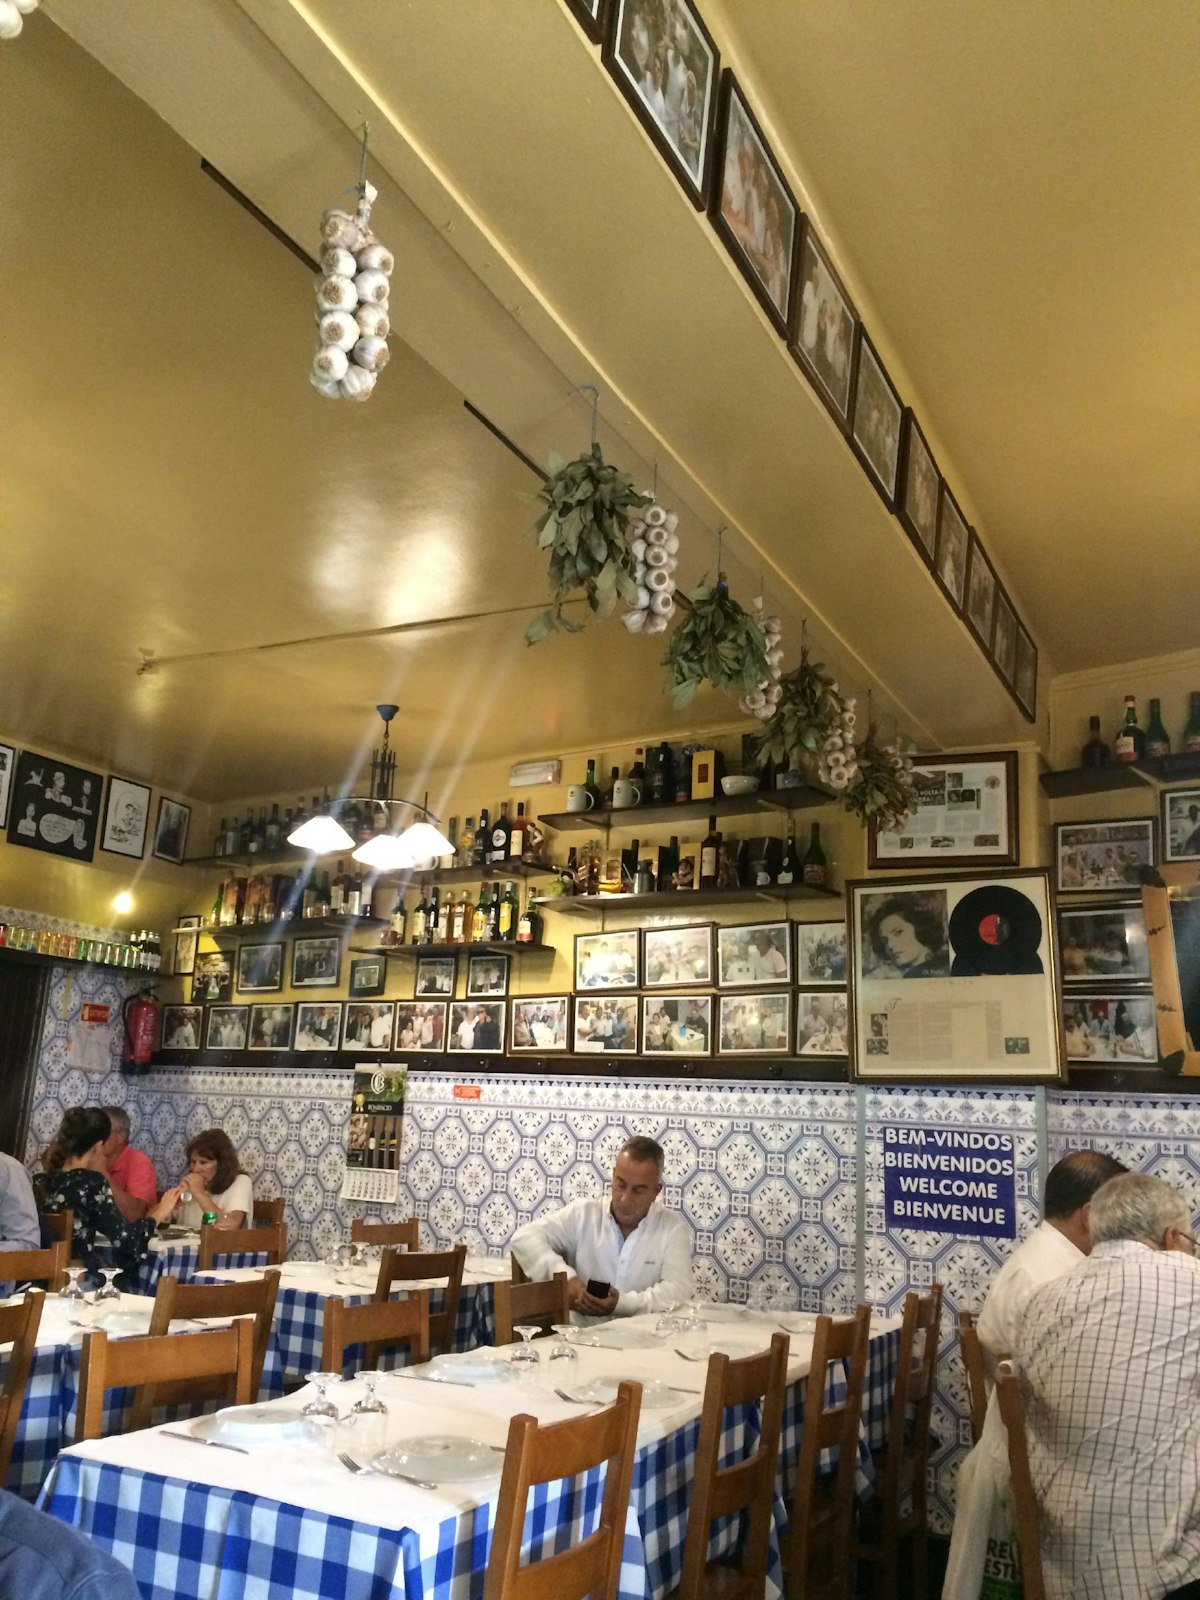 Typical Portuguese food at the most popular tasca in Mouraria